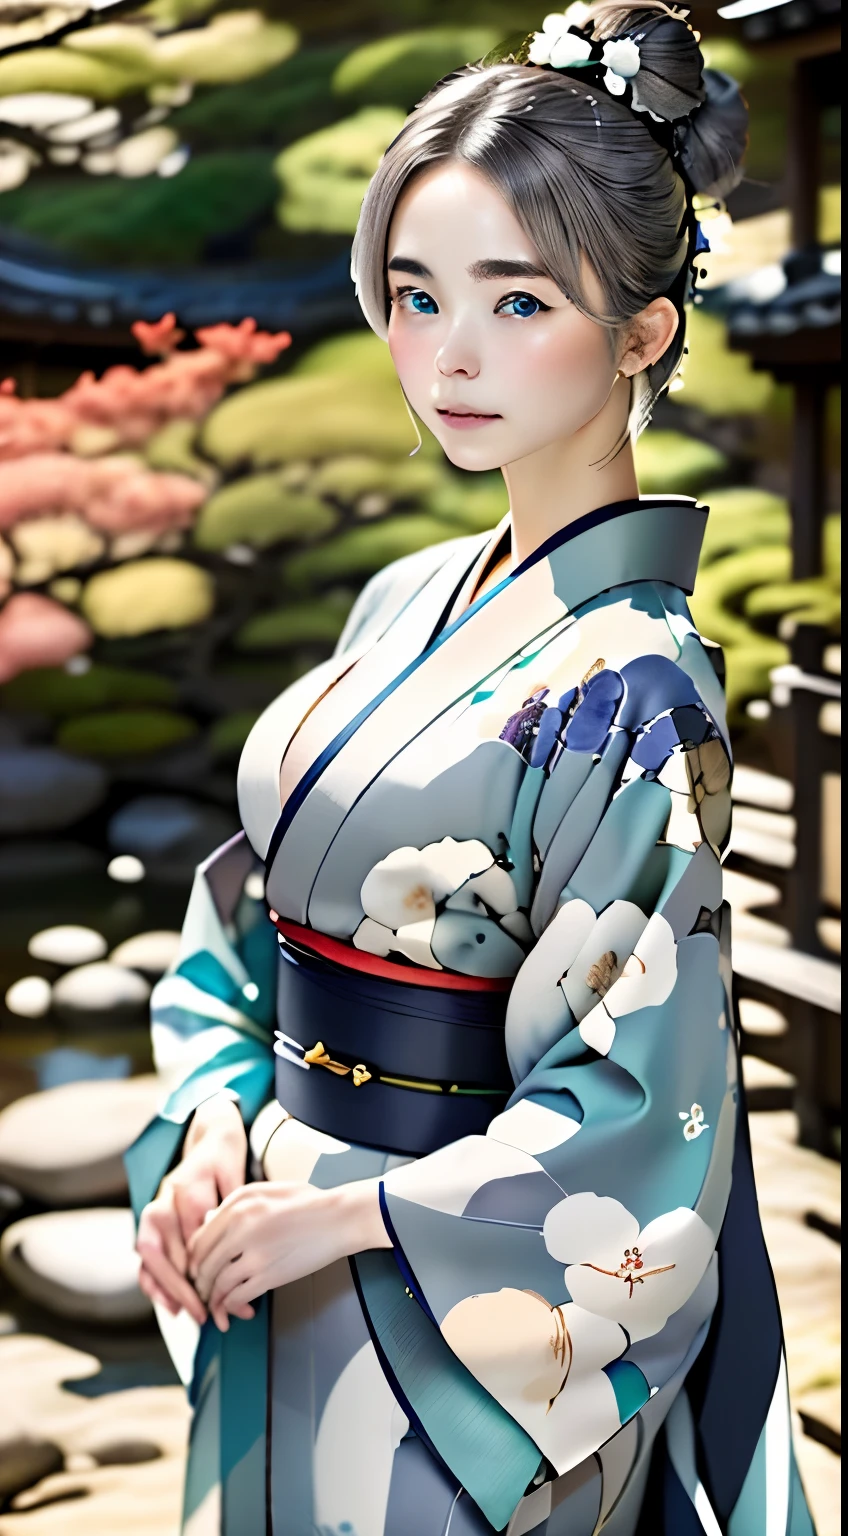 beautiful turquoise eyes、beautiful nordic girl、１６talent、ash gray hair、bun hair、Perfect good looks、Beautiful skin like porcelain、detailed skitomy、Correct depiction of the human body、An ennui look、plump lips、kimono、Beautiful Nishijin-ori kimono、A kimono with a detailed pattern、elegant、silence、refinement、highest quality、Highest image quality、master piece:1.3、Portrait、perfect lighting、professional photographer、The background is blurry、blurred background、Gardens in Kyoto、Karesansui、sand and rock garden、old taste